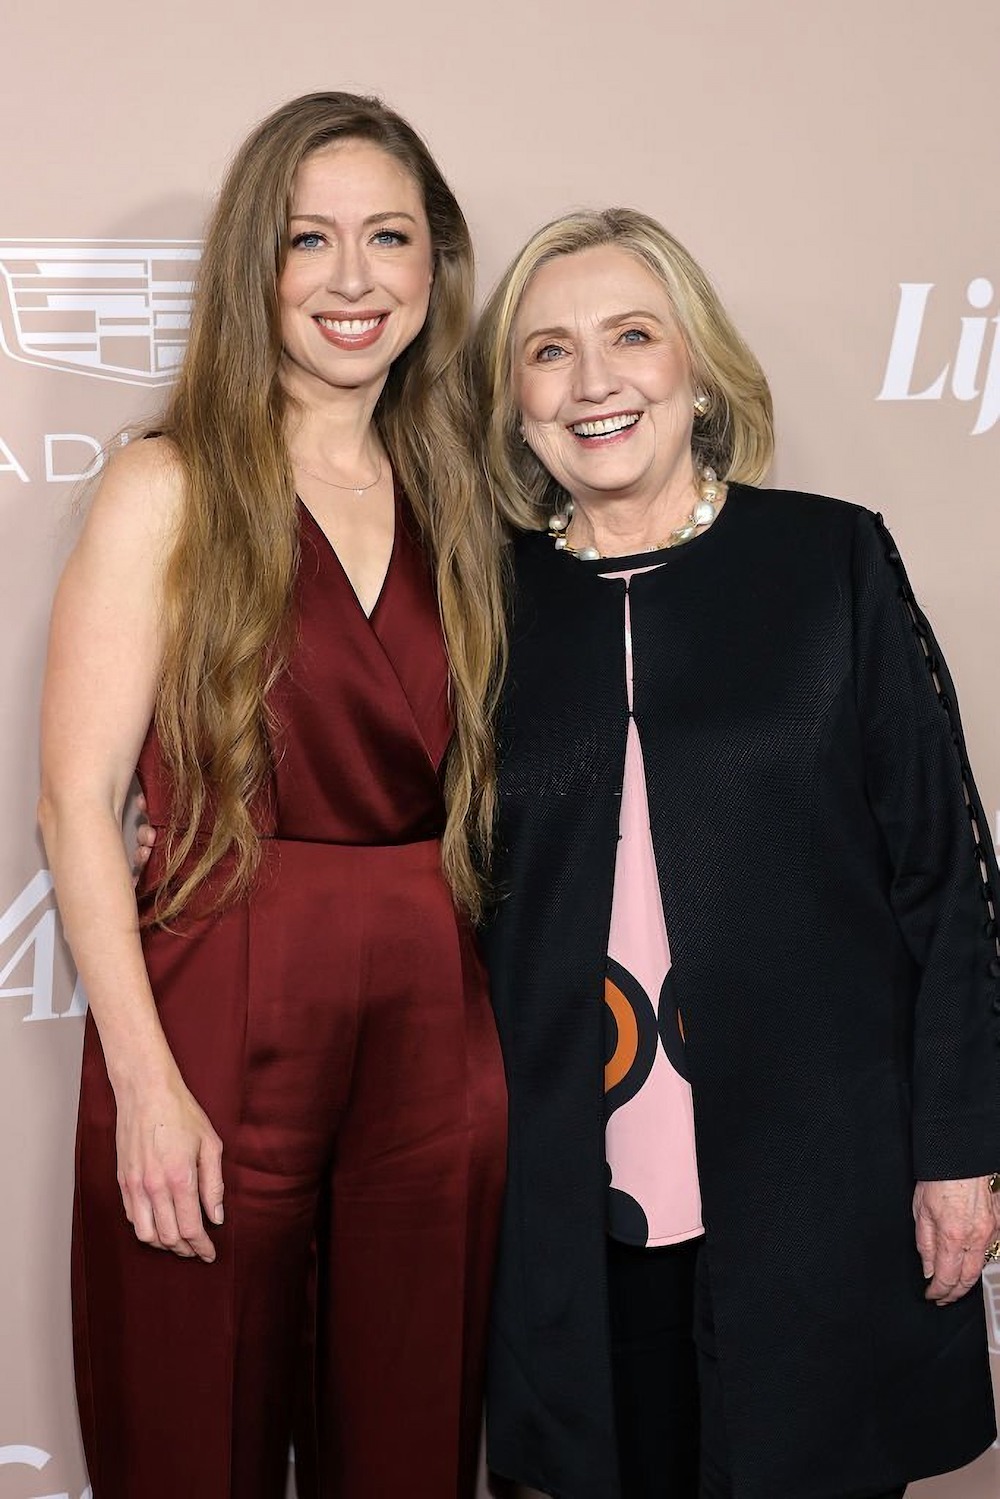 Hilary Clinton and Daughter Chelsea Honored at Variety's 2022 Power of Women Event